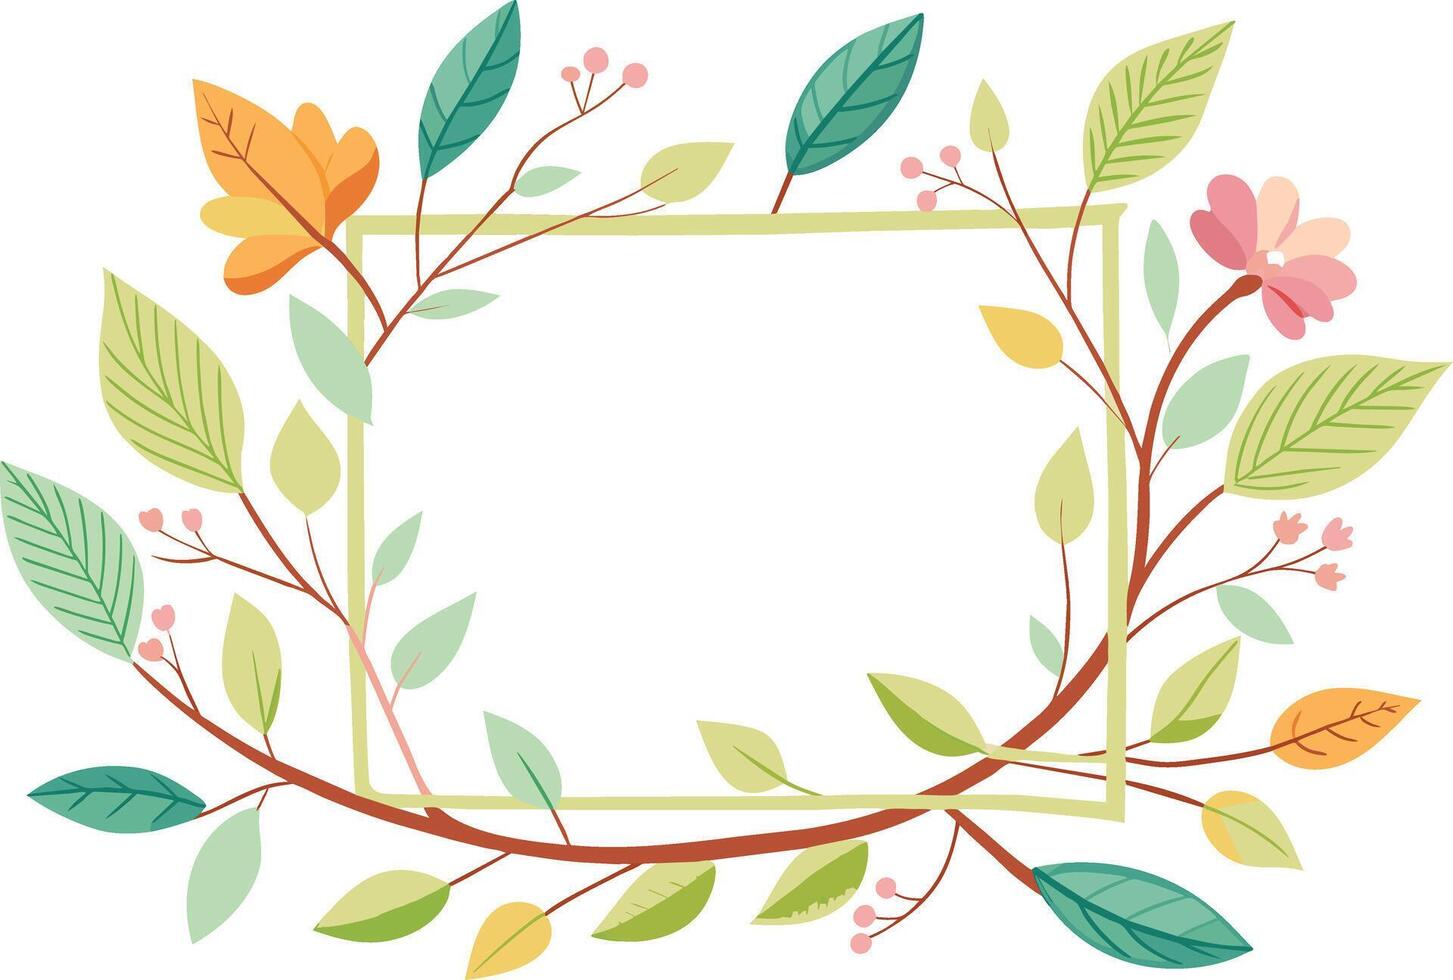 floral frame with branches and leafs icon vector illustration